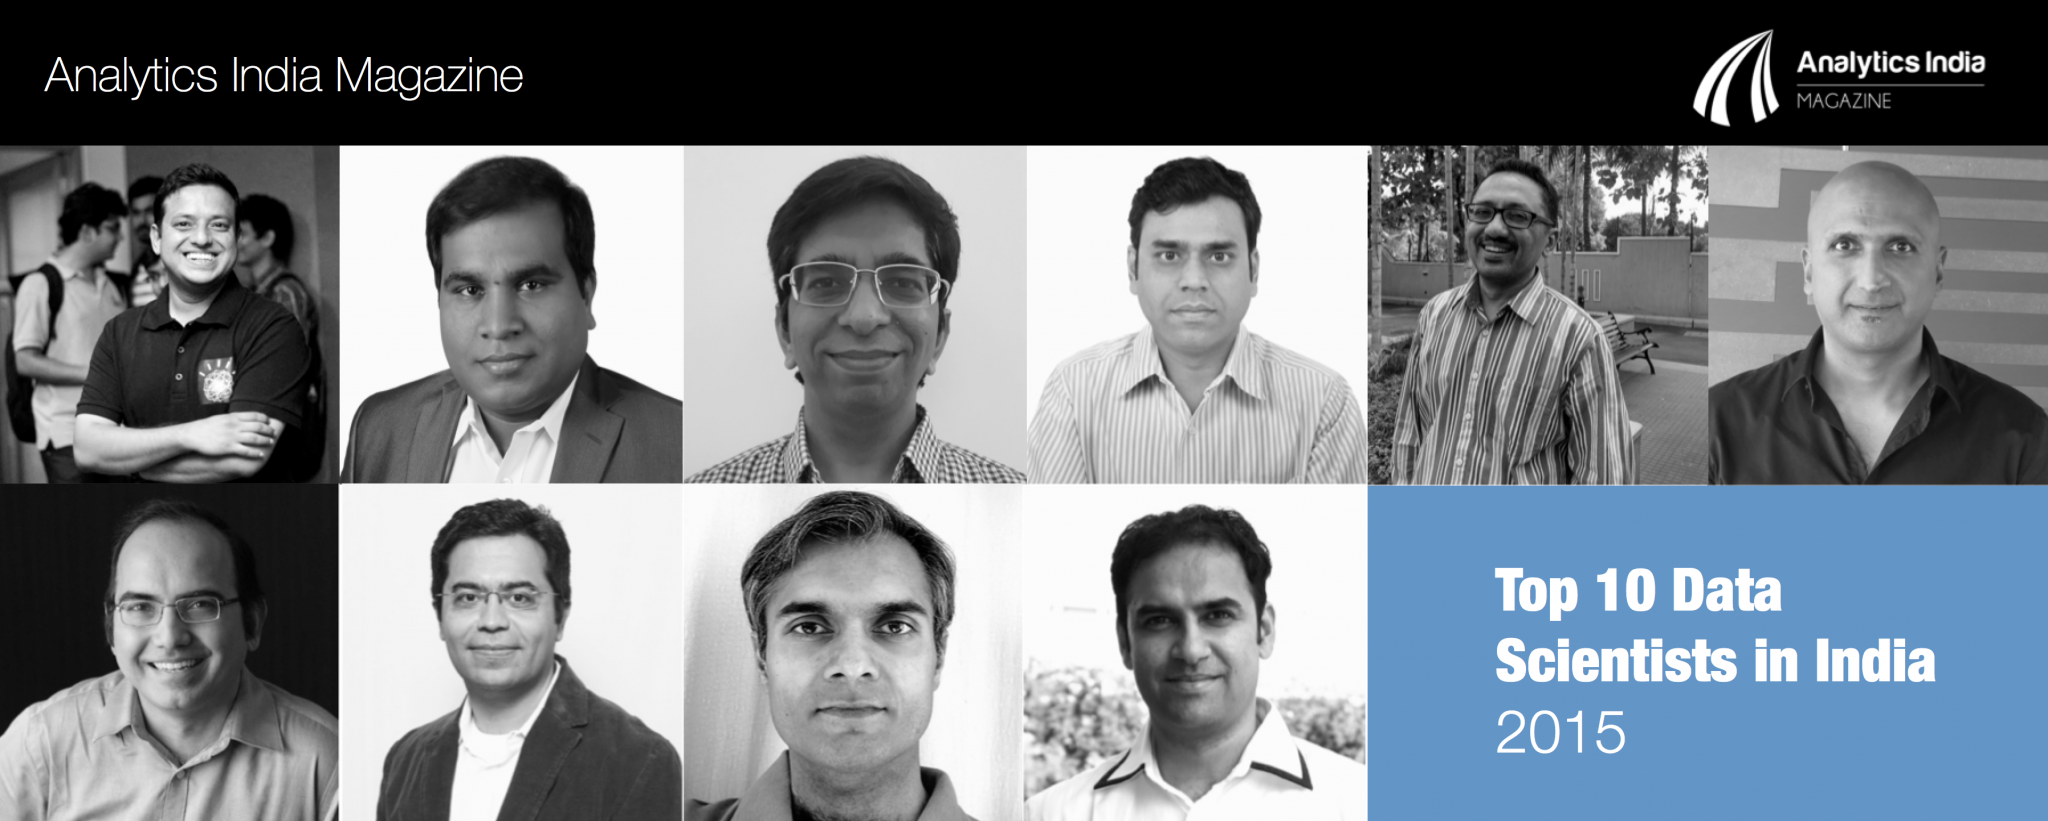 Top 10 Data Scientists in India - 2015